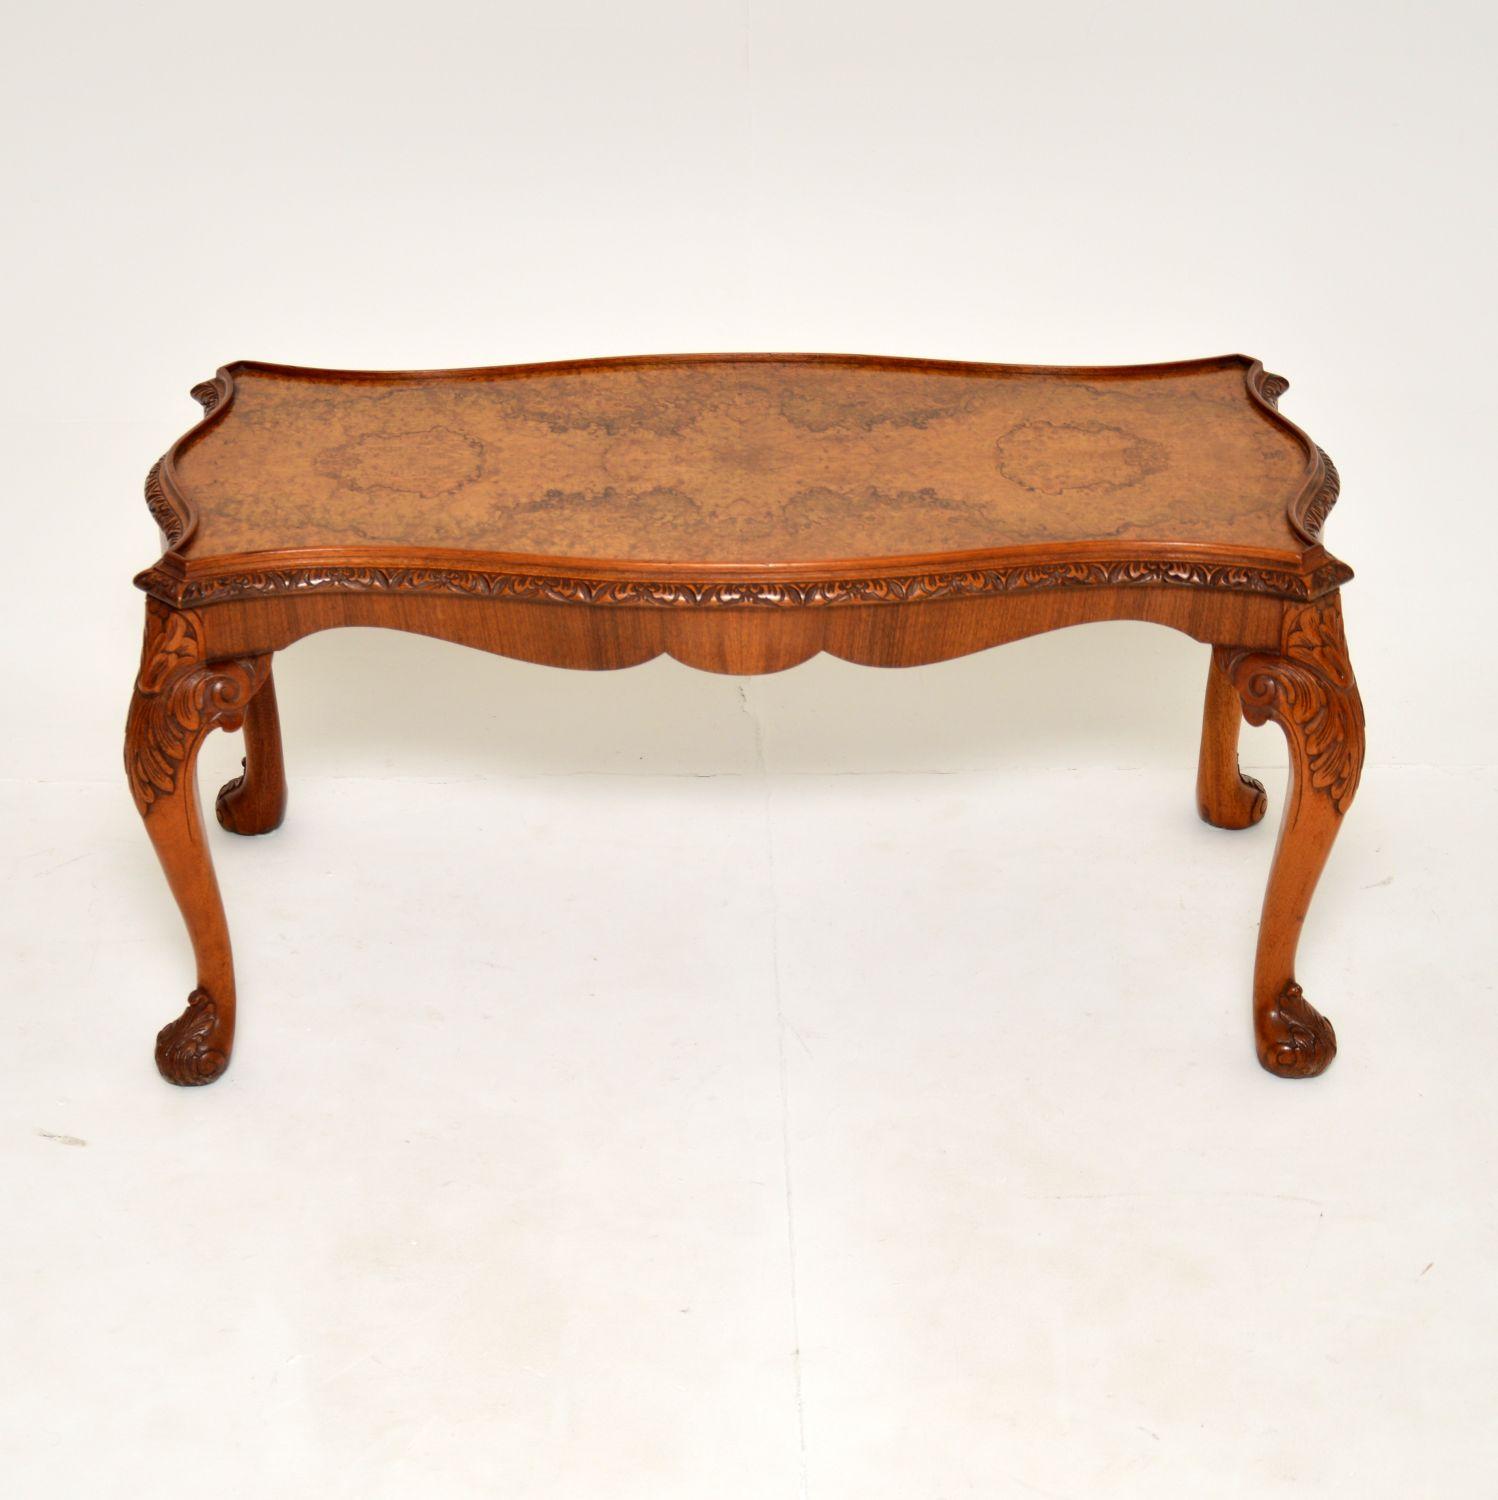 A fantastic antique walnut coffee table in the Queen Anne Style. This was made in England, it dates from around the 1930’s.

The quality is outstanding, this has deep and intricate carving around the serpentine shaped edges. The cabriole legs also